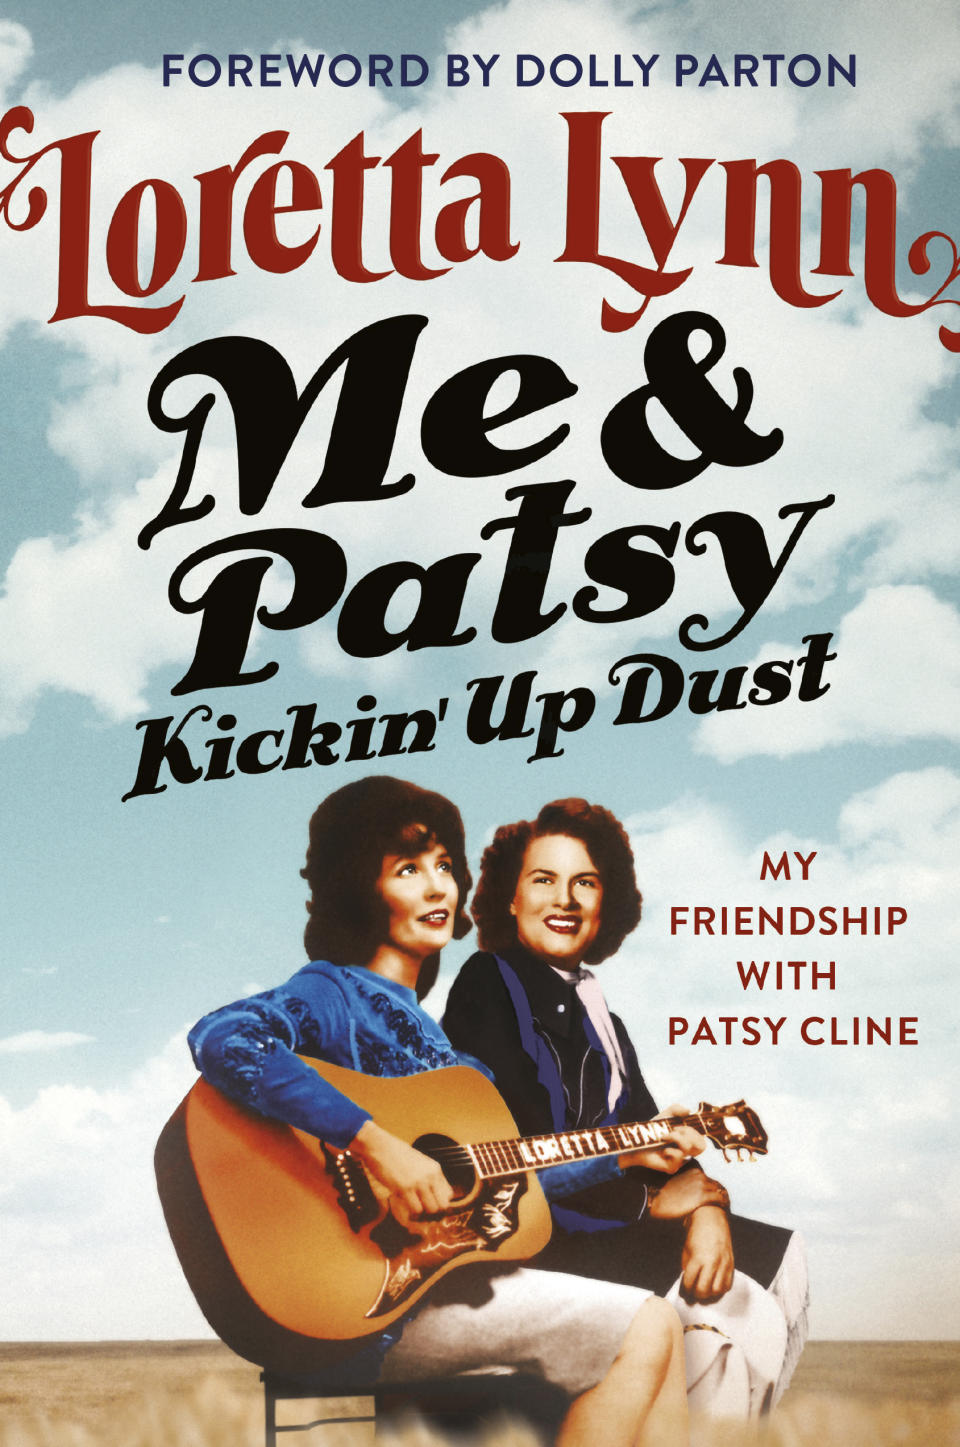 This cover image released by Grand Centra shows "Me & Patsy Kickin’ Up Dust: My Friendship with Patsy Cline" by Loretta Lynn. (Grand Central via AP)